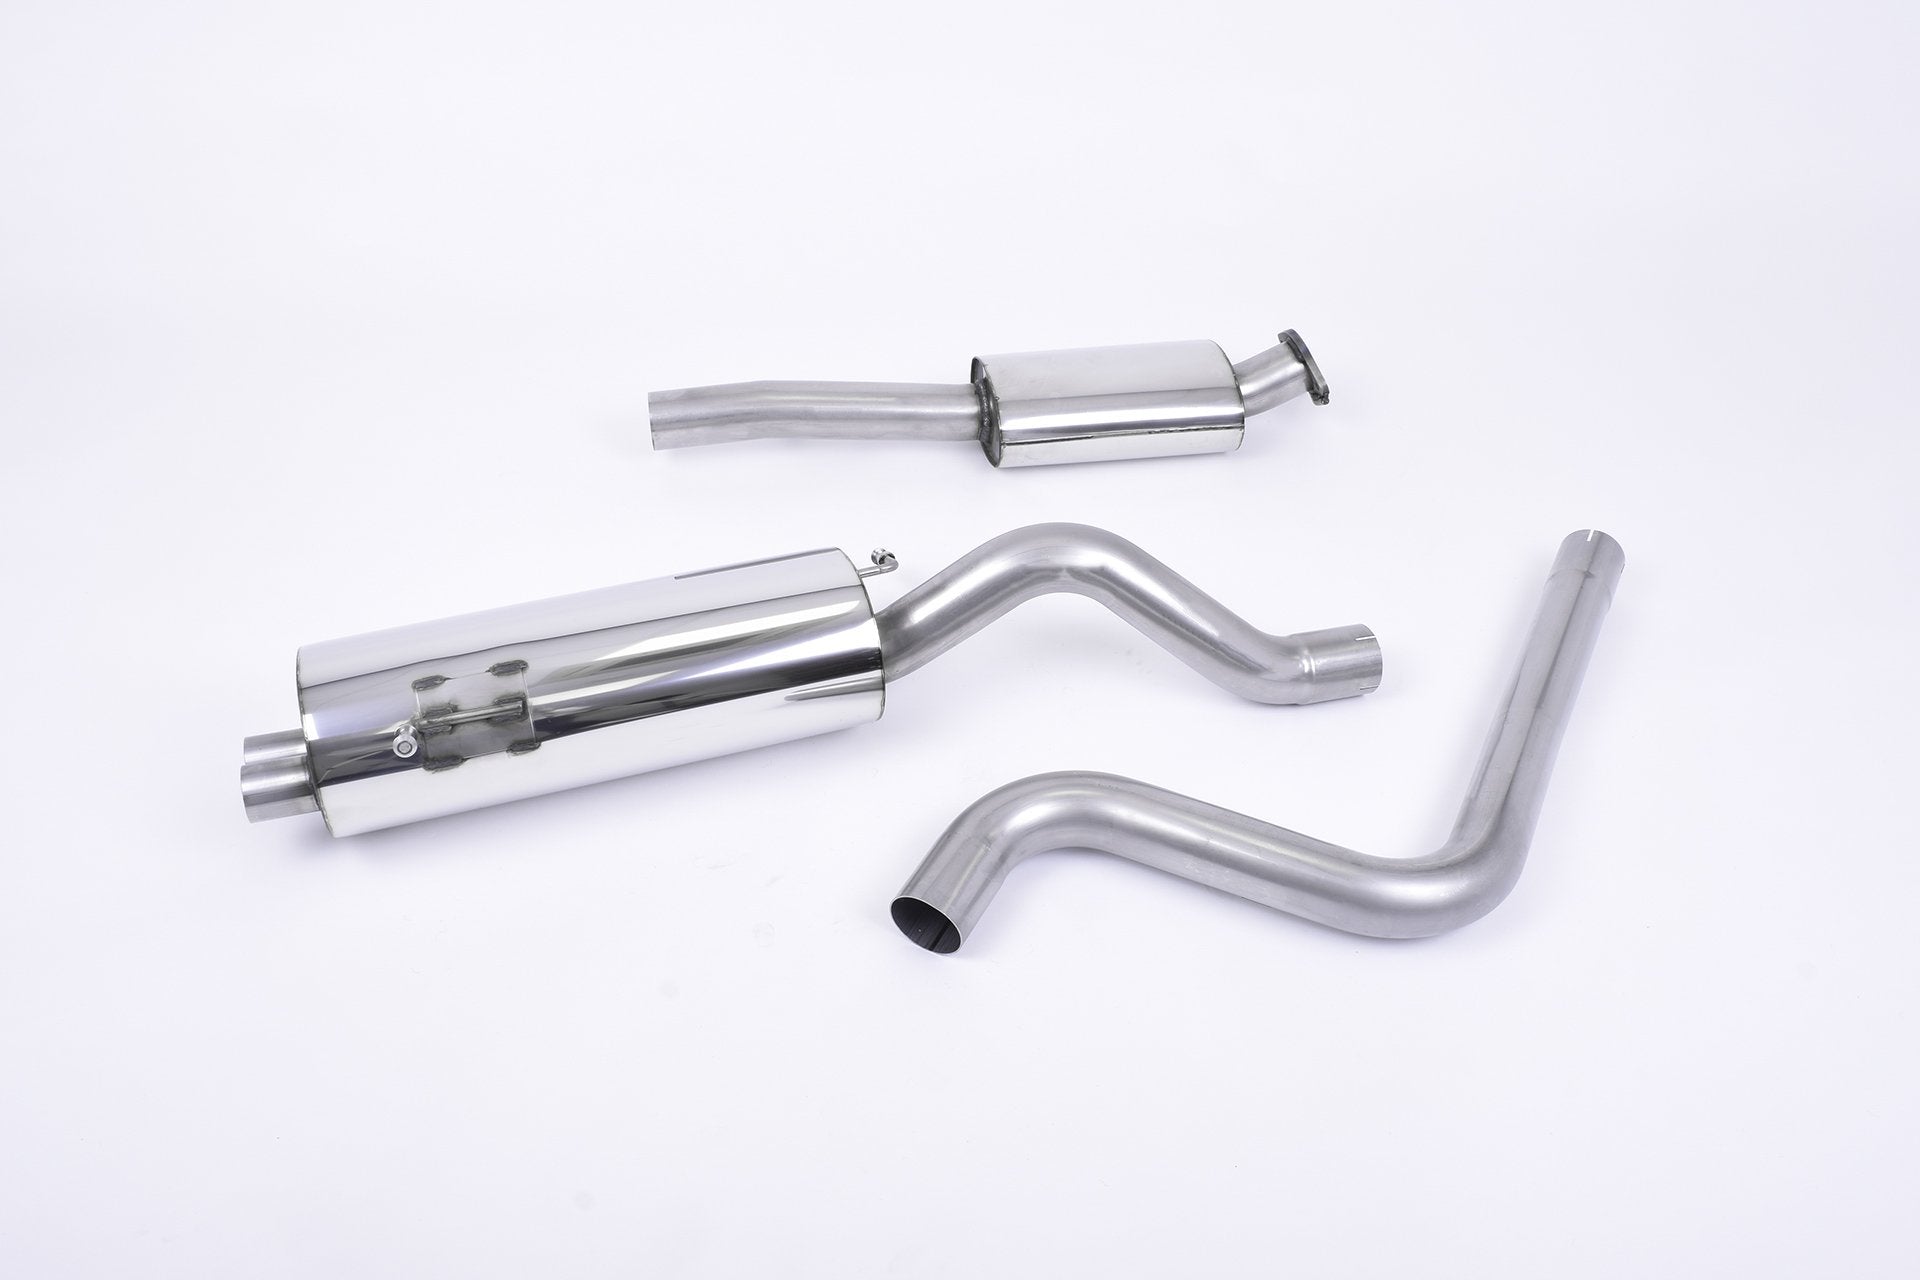 Milltek Race Resonated Catback Exhaust for MK7 Fiesta ST with Polished Tips